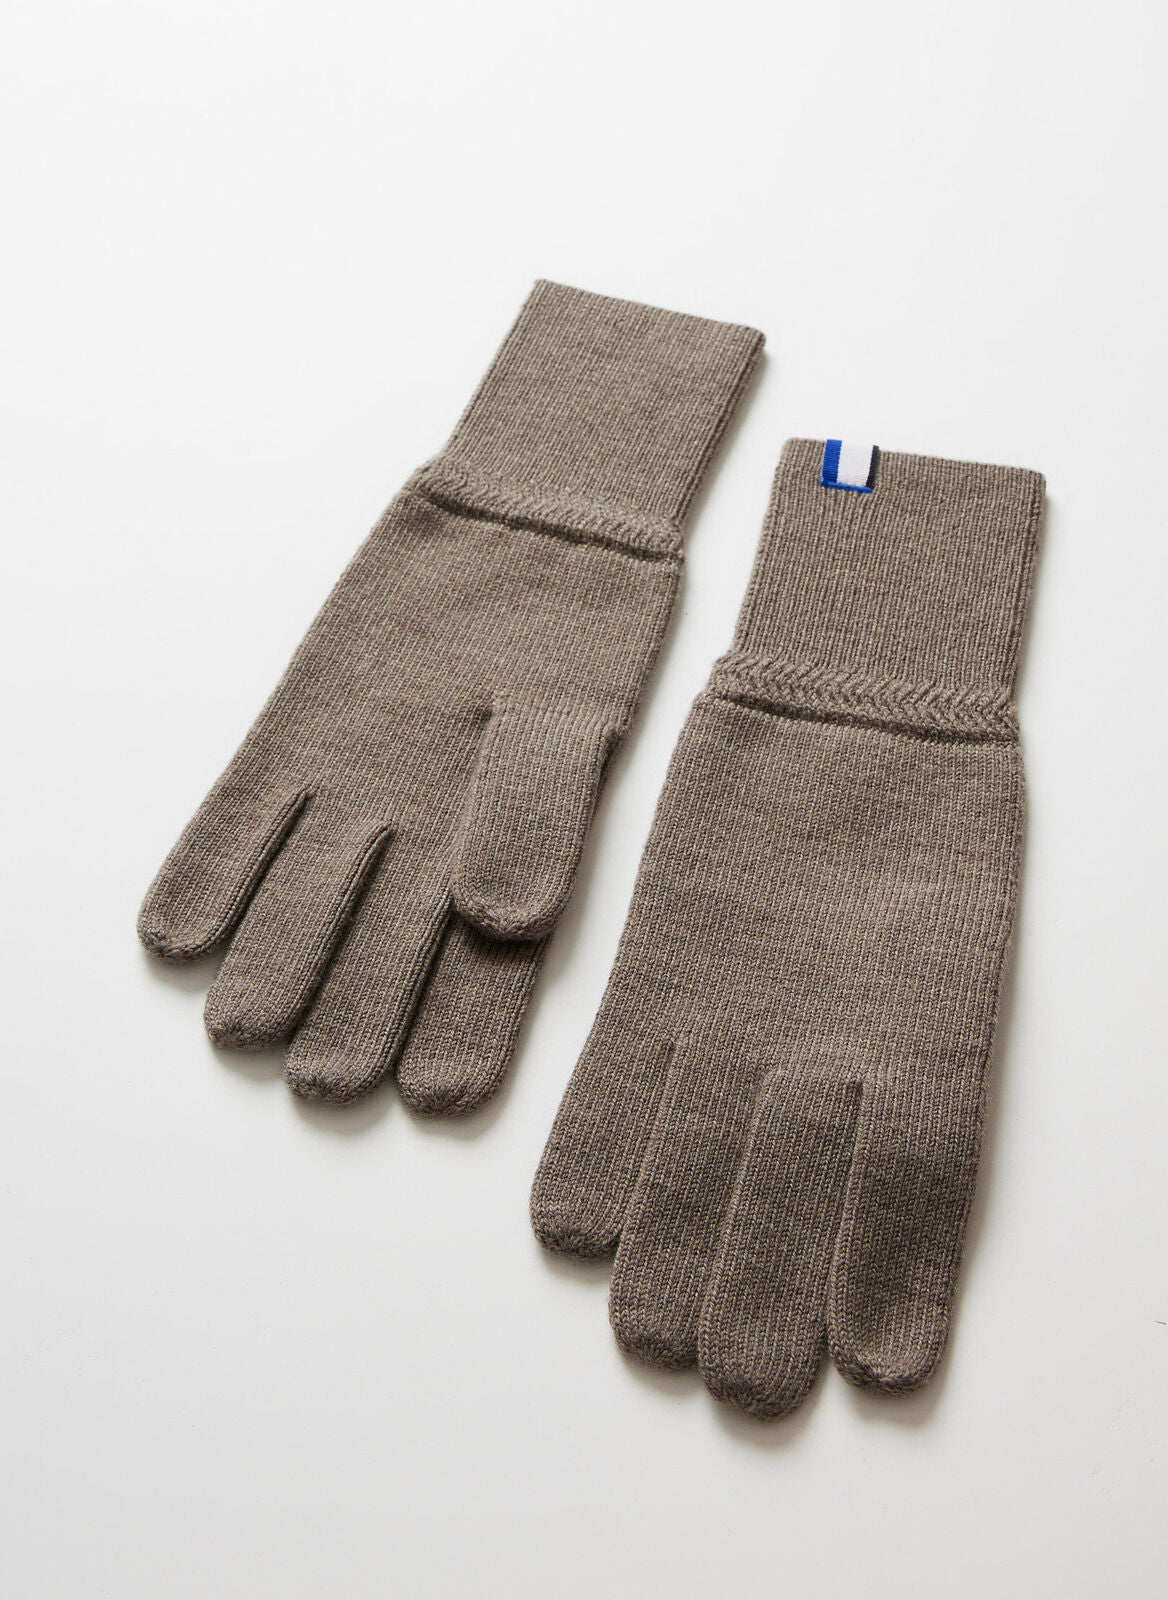 Kit and Ace — Cozy Merino Gloves